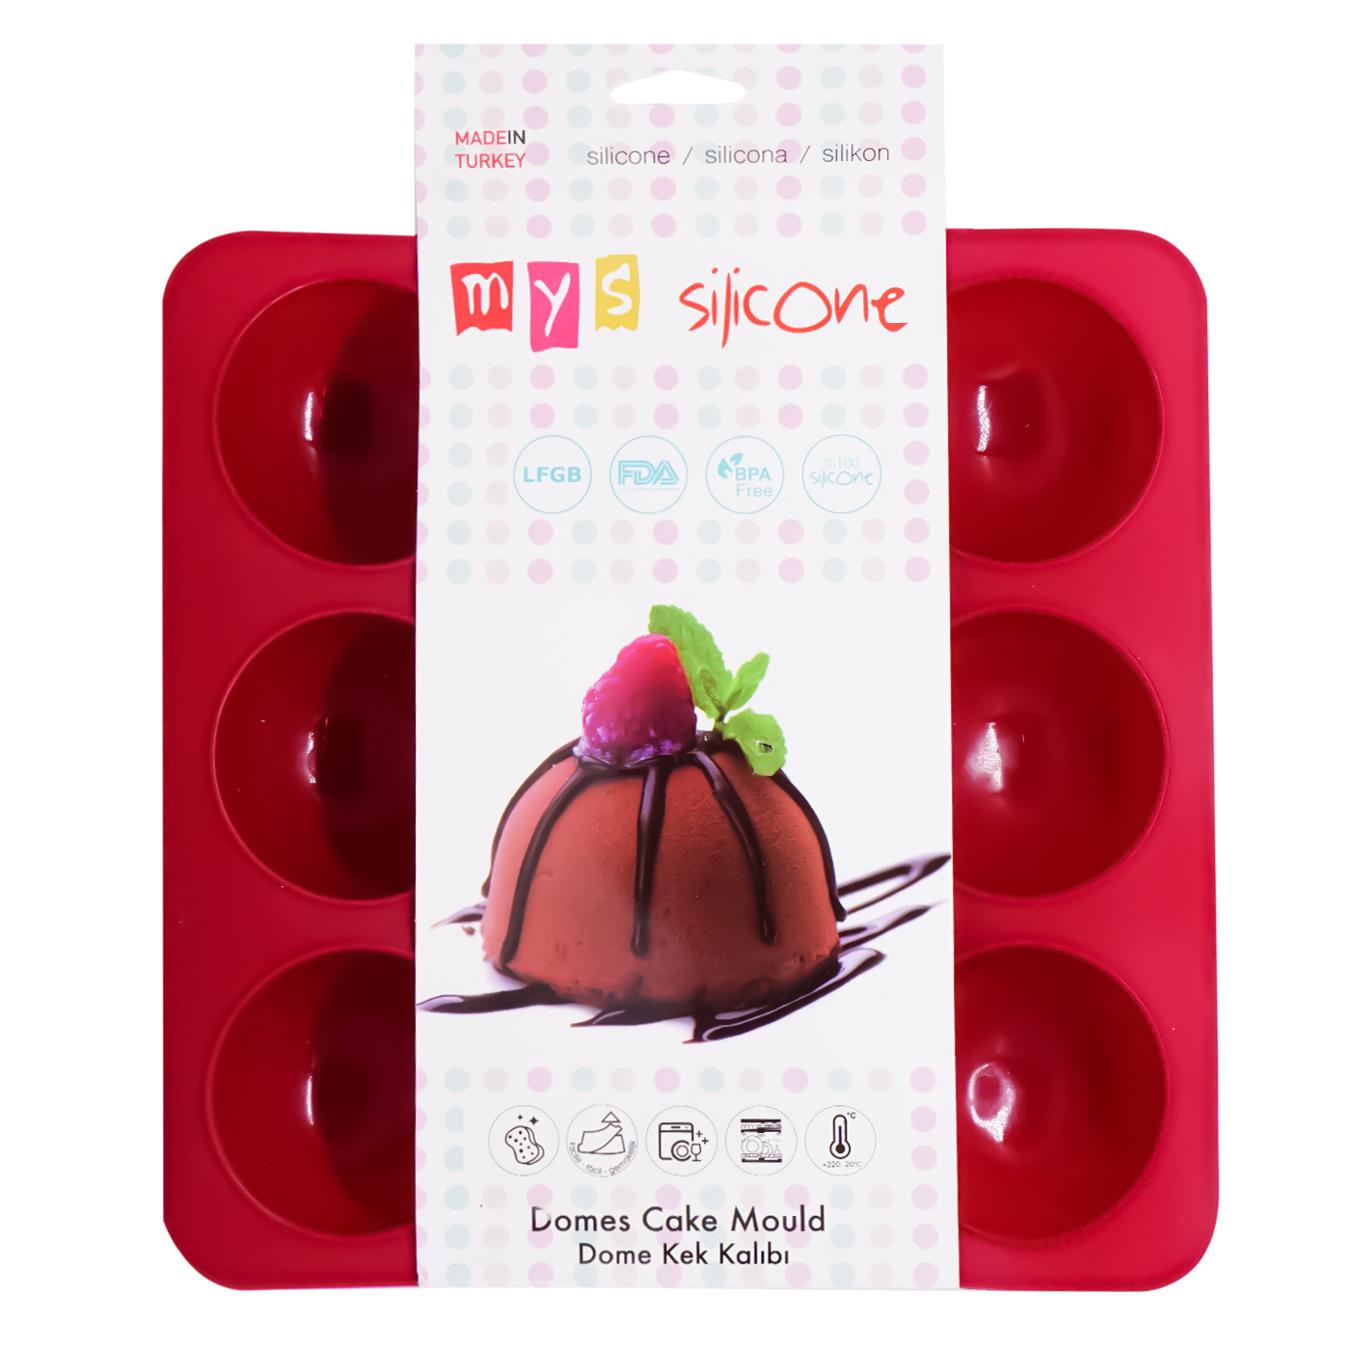 Form MYS Silicone dome for baking cupcakes 9 pcs